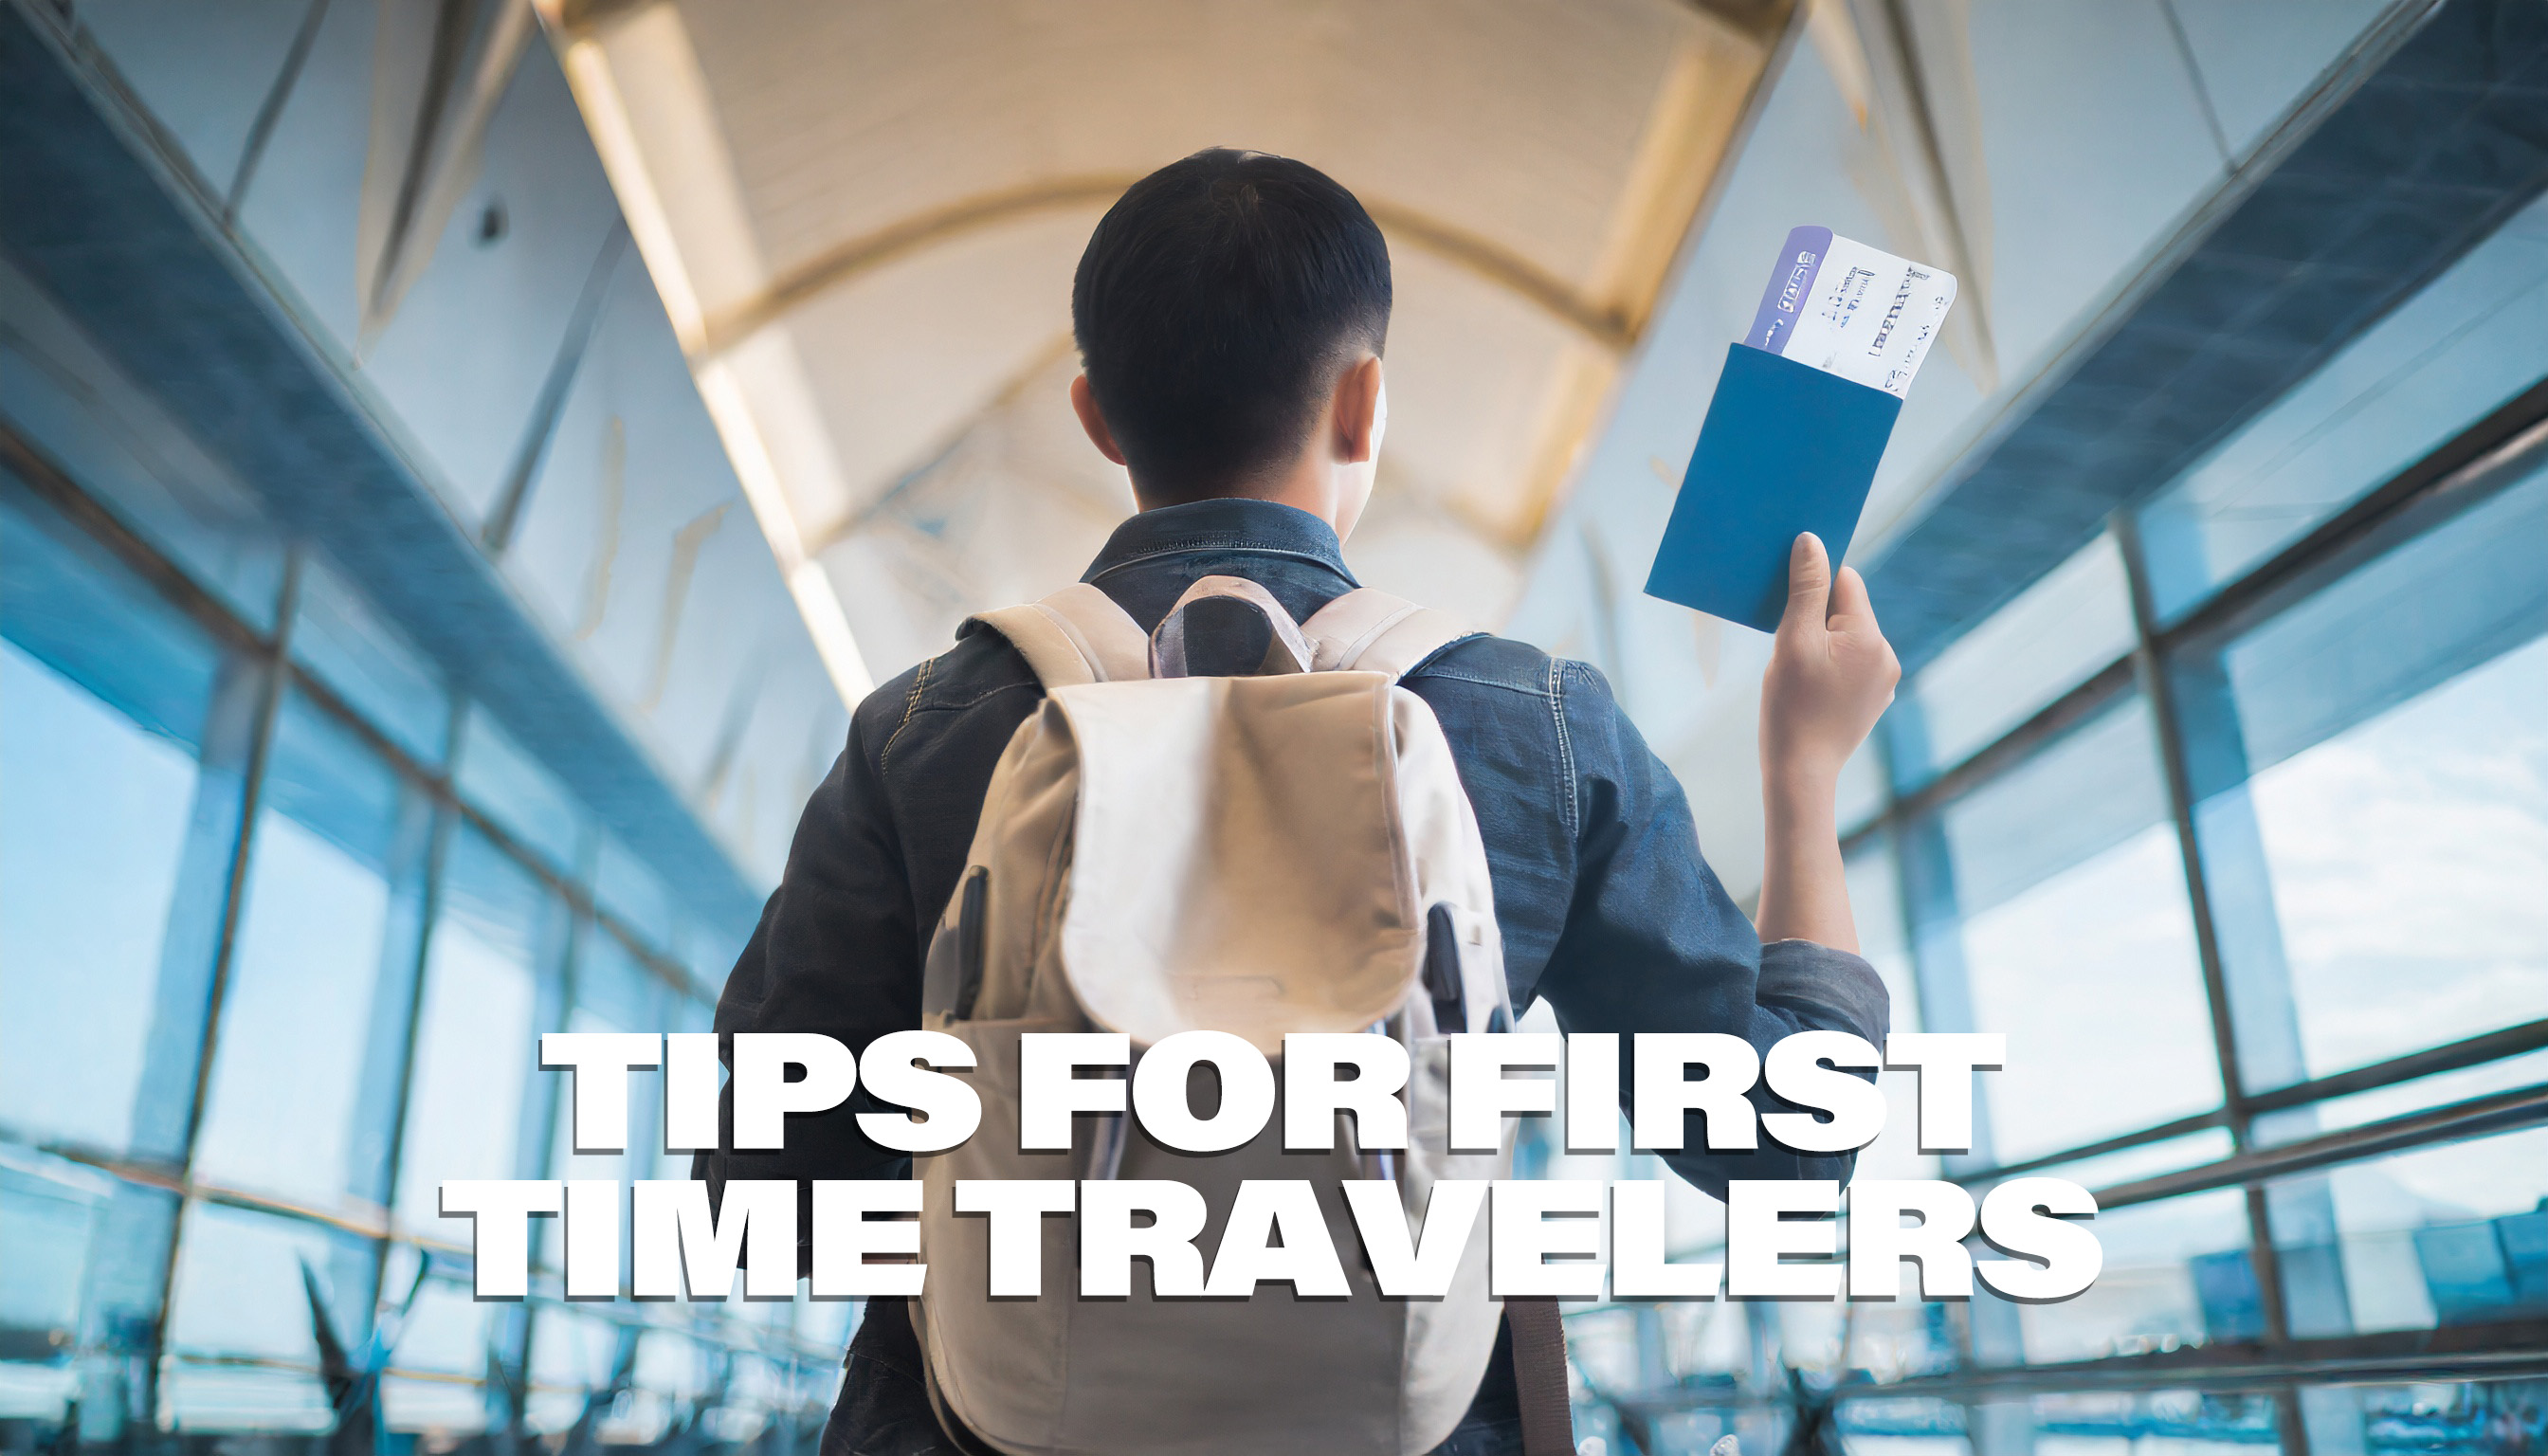 Tips for first time travelers.jpg